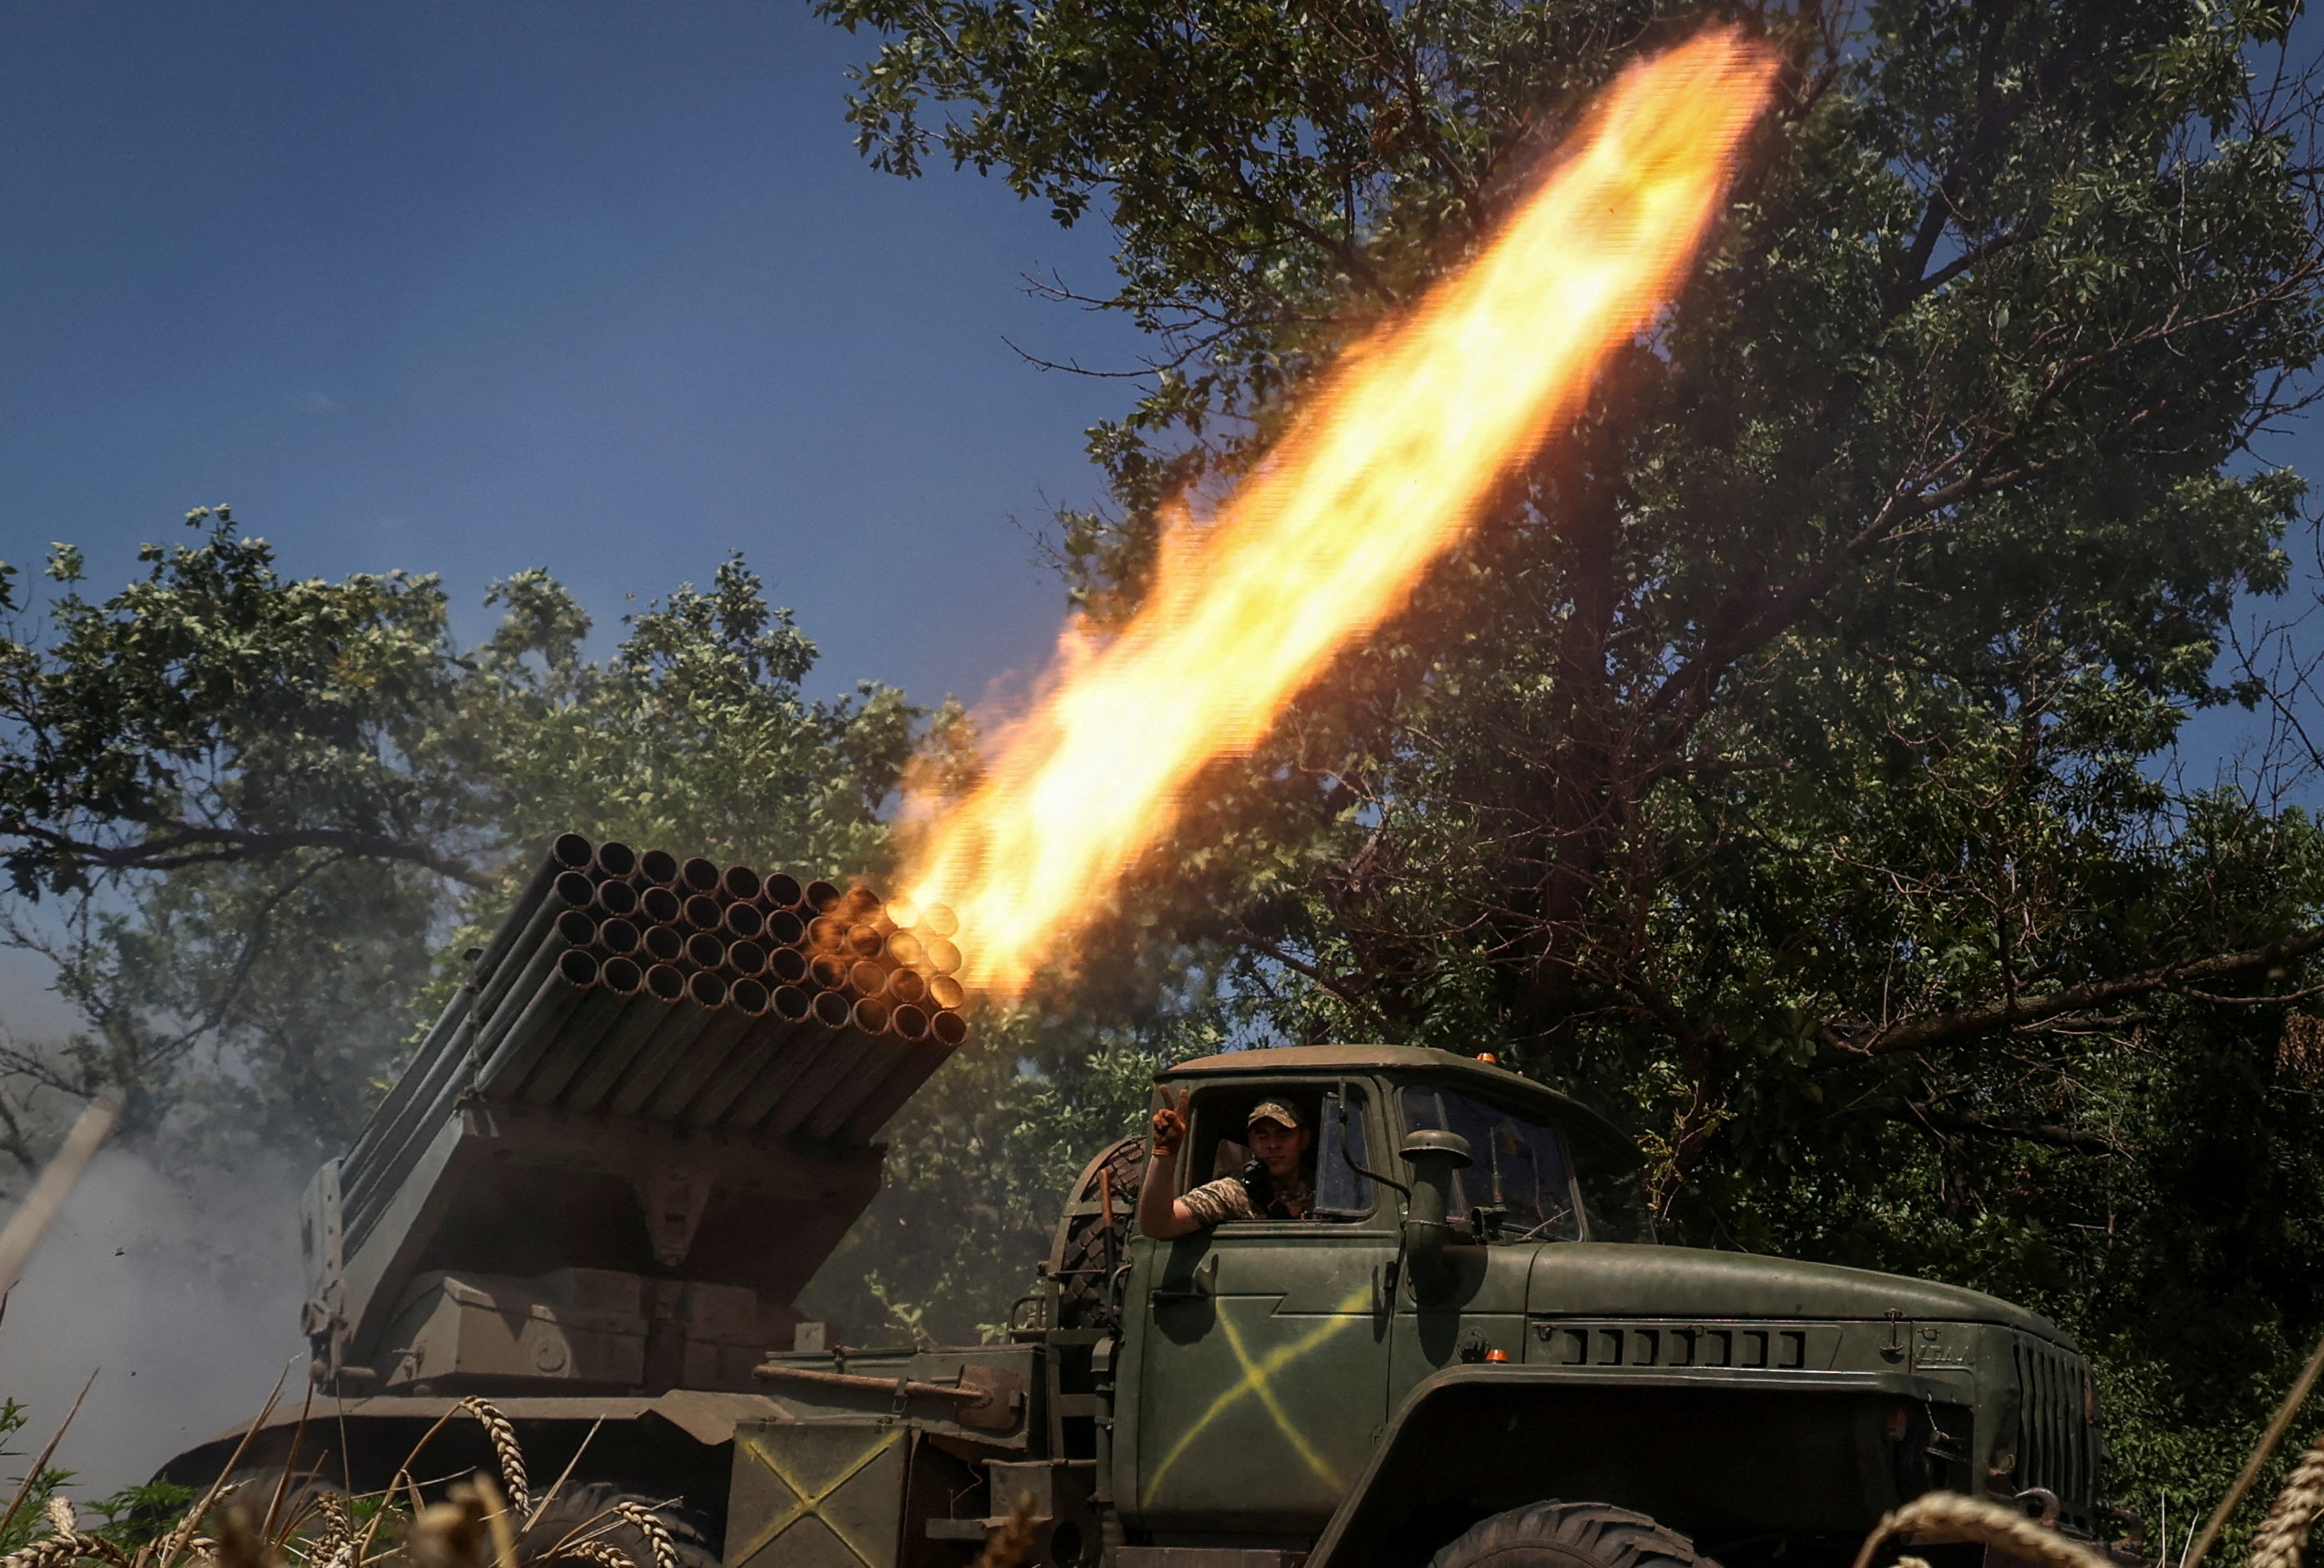 Ukrainian servicemen of the 59th Separate Motorised Infantry Brigade fire a BM-21 Grad multiple launch rocket system towards Russian troops near a front line, amid Russia’s attack on Ukraine, near the town of Avdiivka, in the Donetsk region